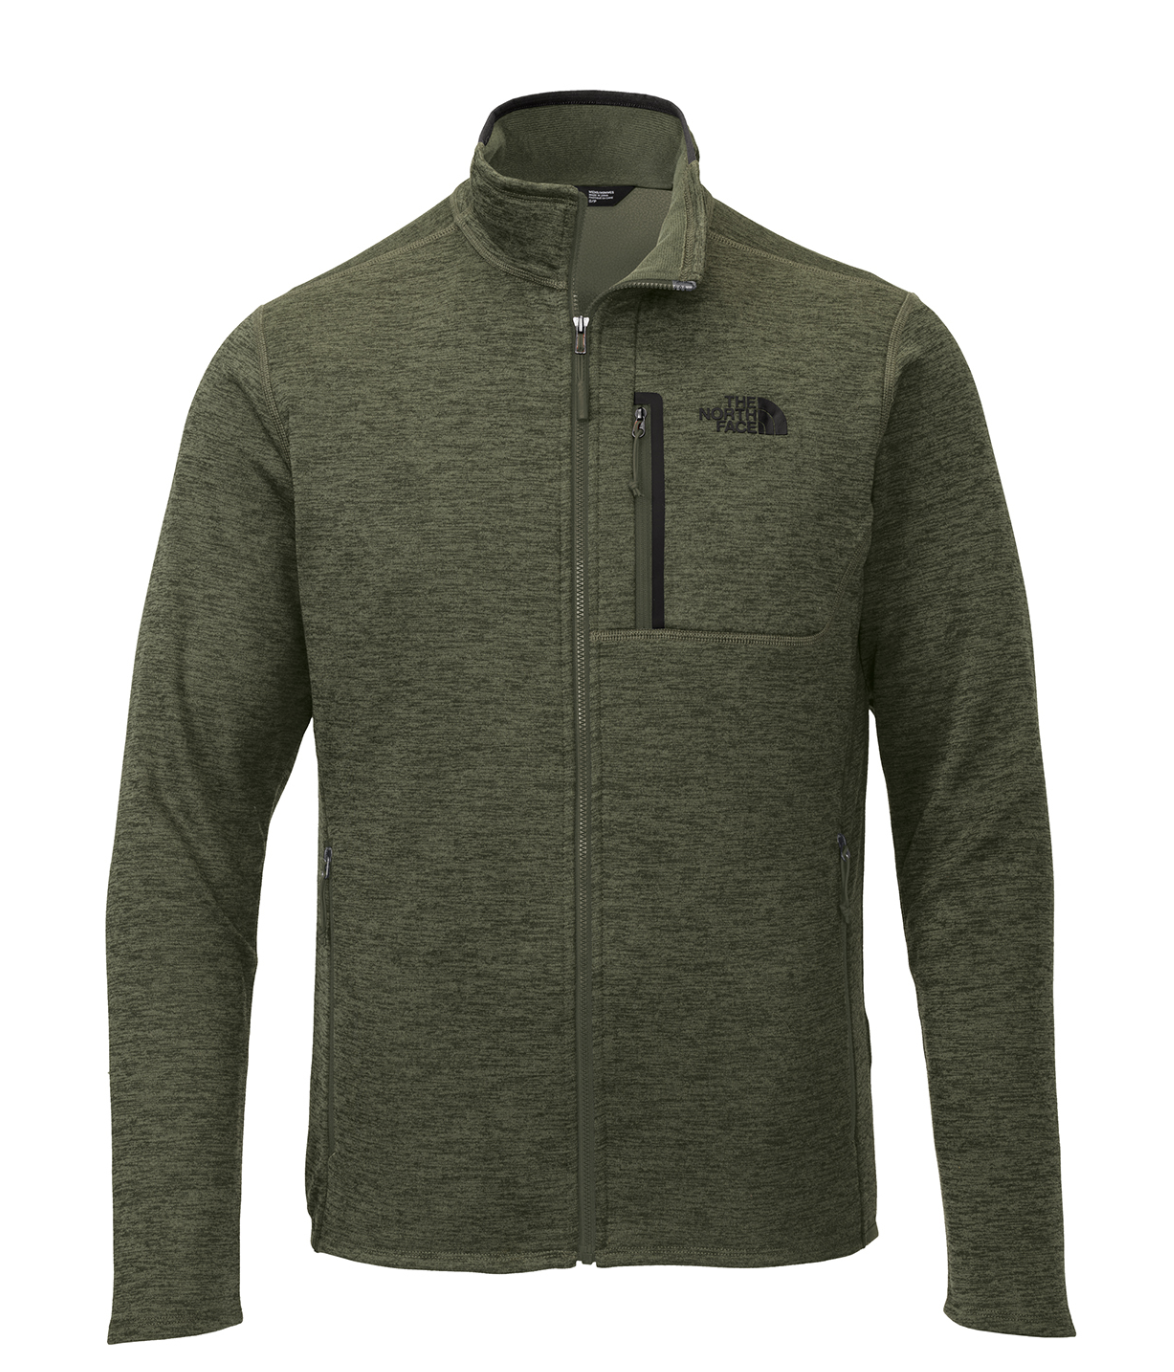 The North Face® Ladies Sweater Fleece Jacket, Rocky Mountain Embroidery